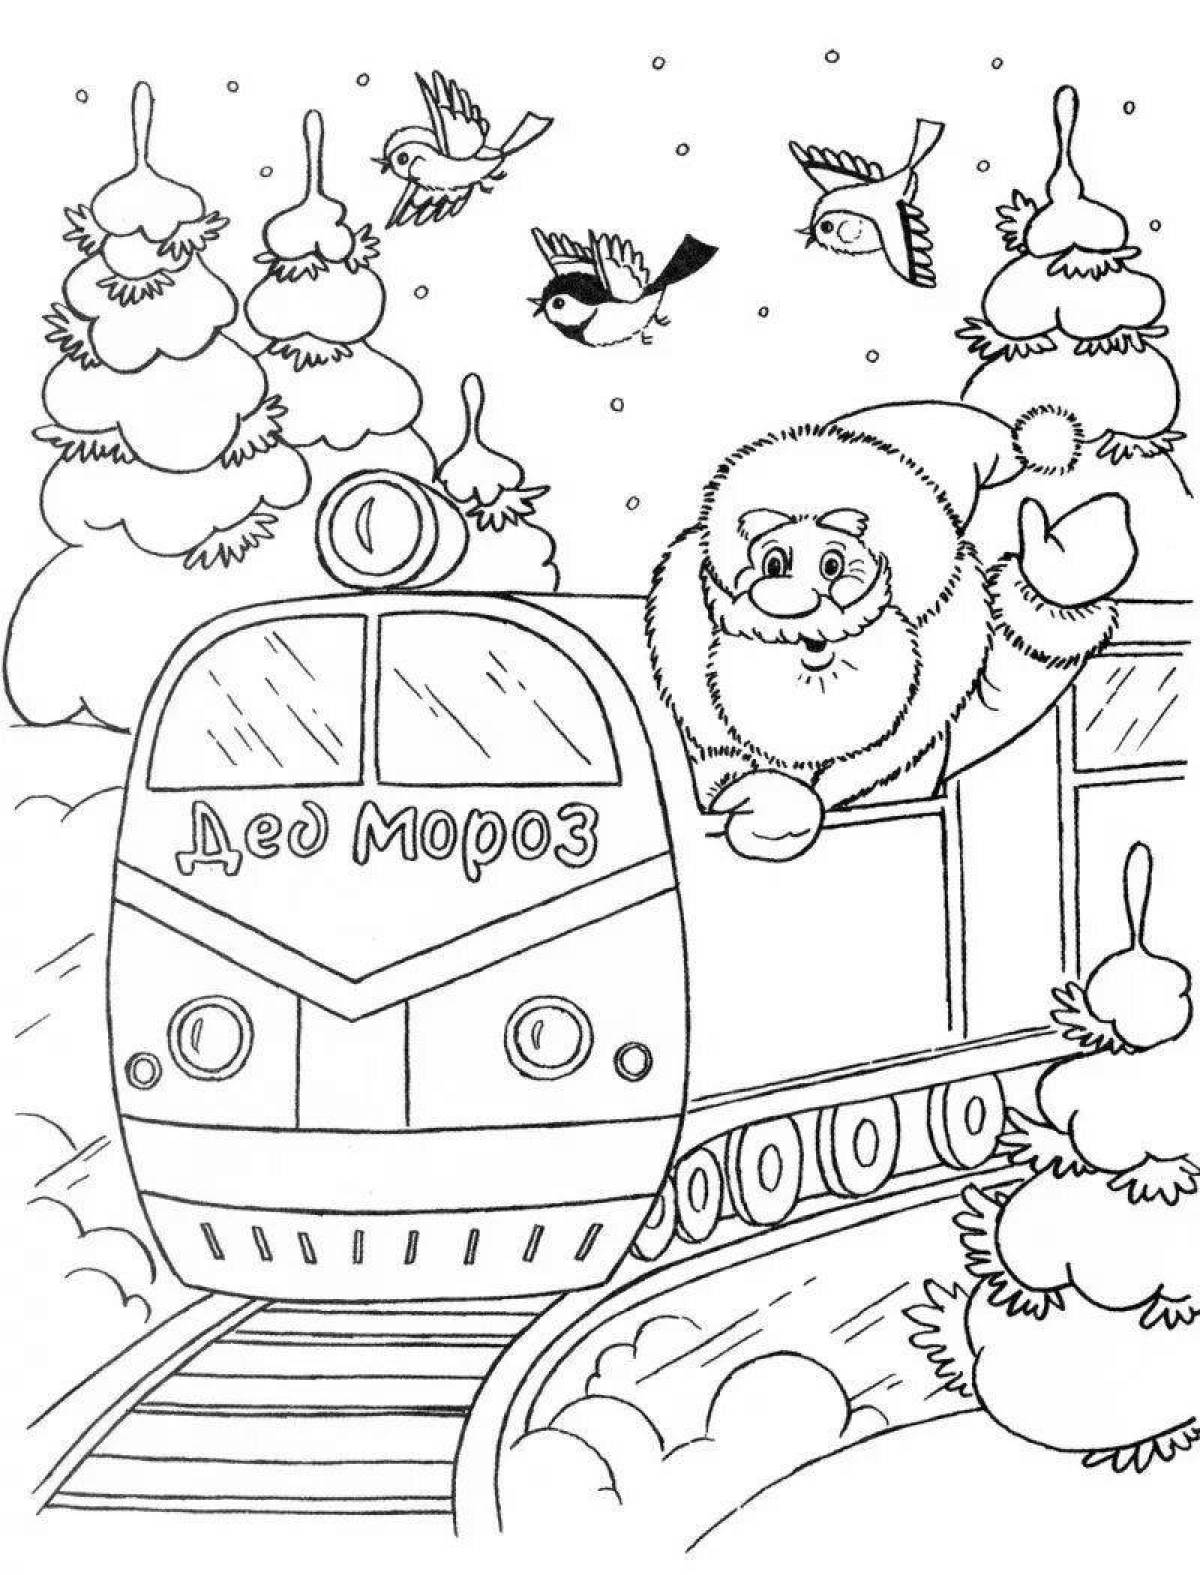 Merry Christmas car coloring page